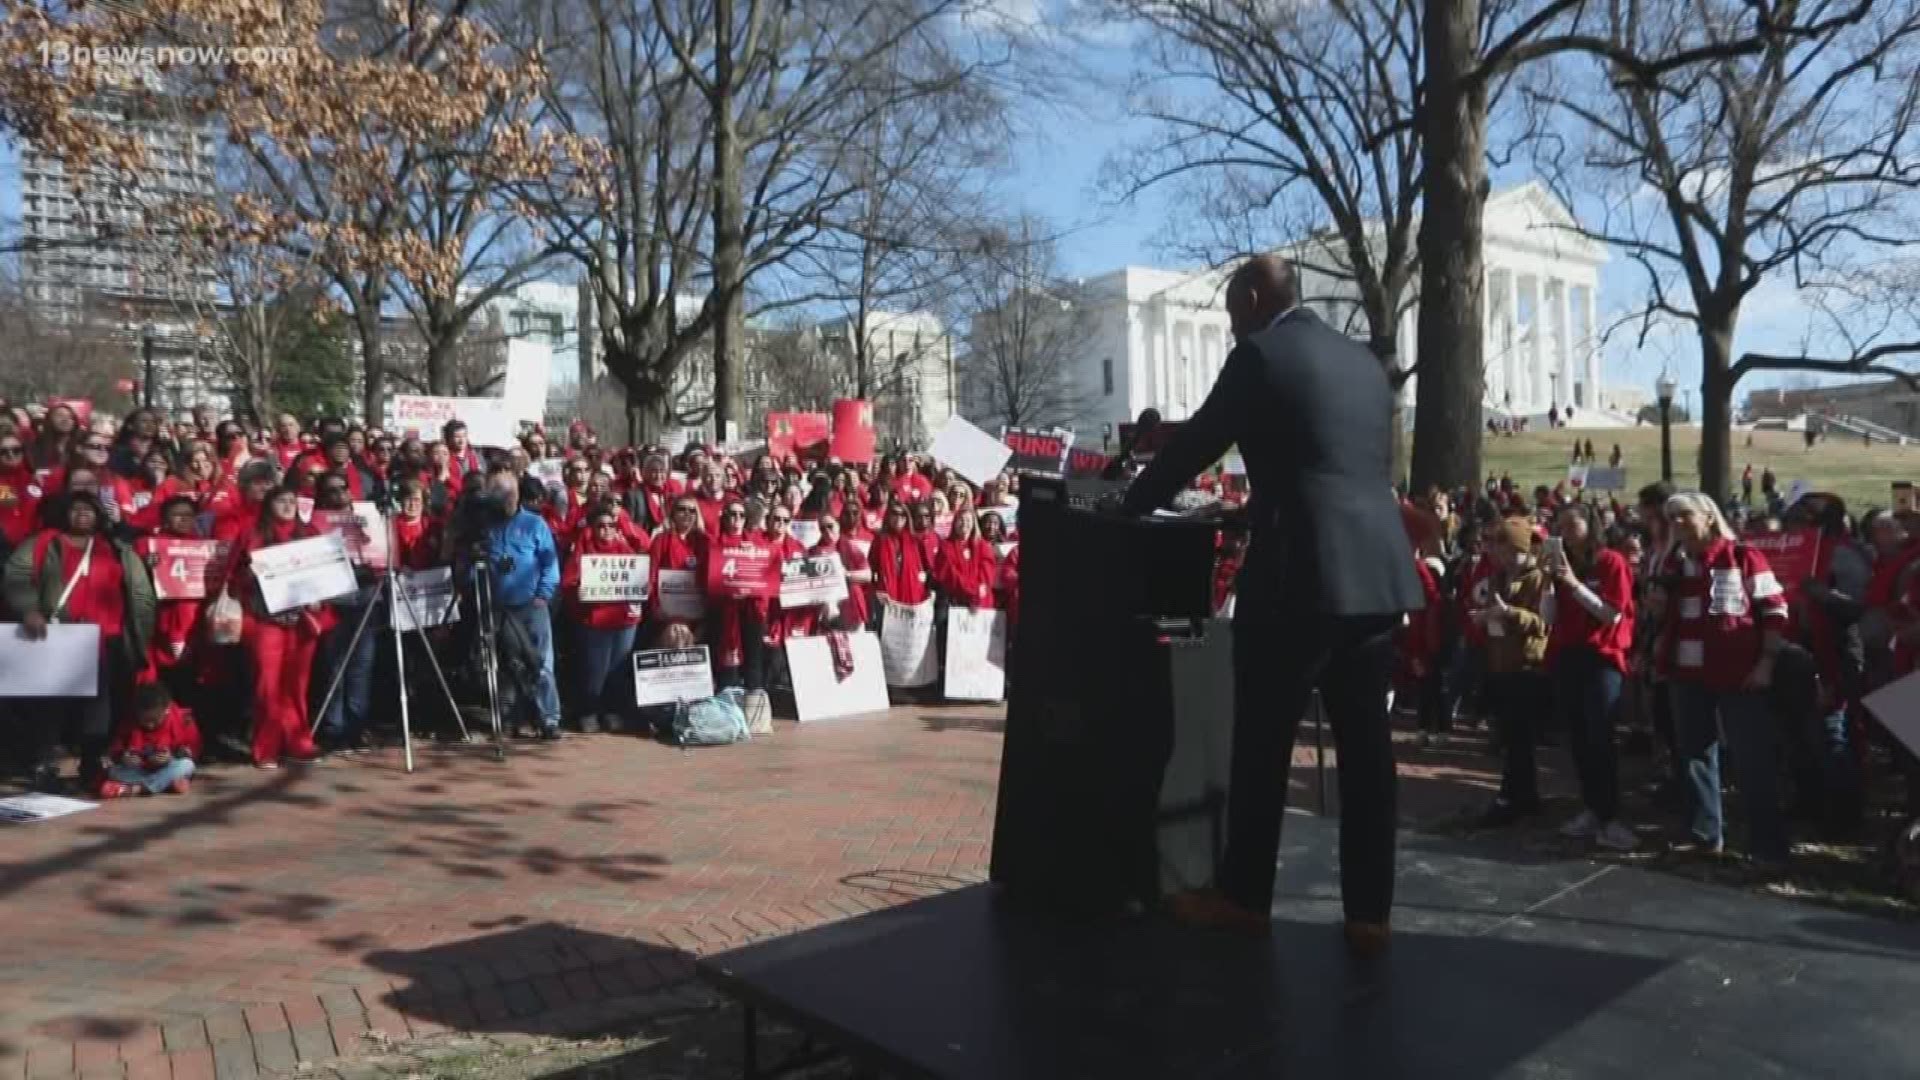 Teachers rallied for public education funding on Capitol Hill in Richmond. They wanted lawmakers to know that education funding should be a top priority.